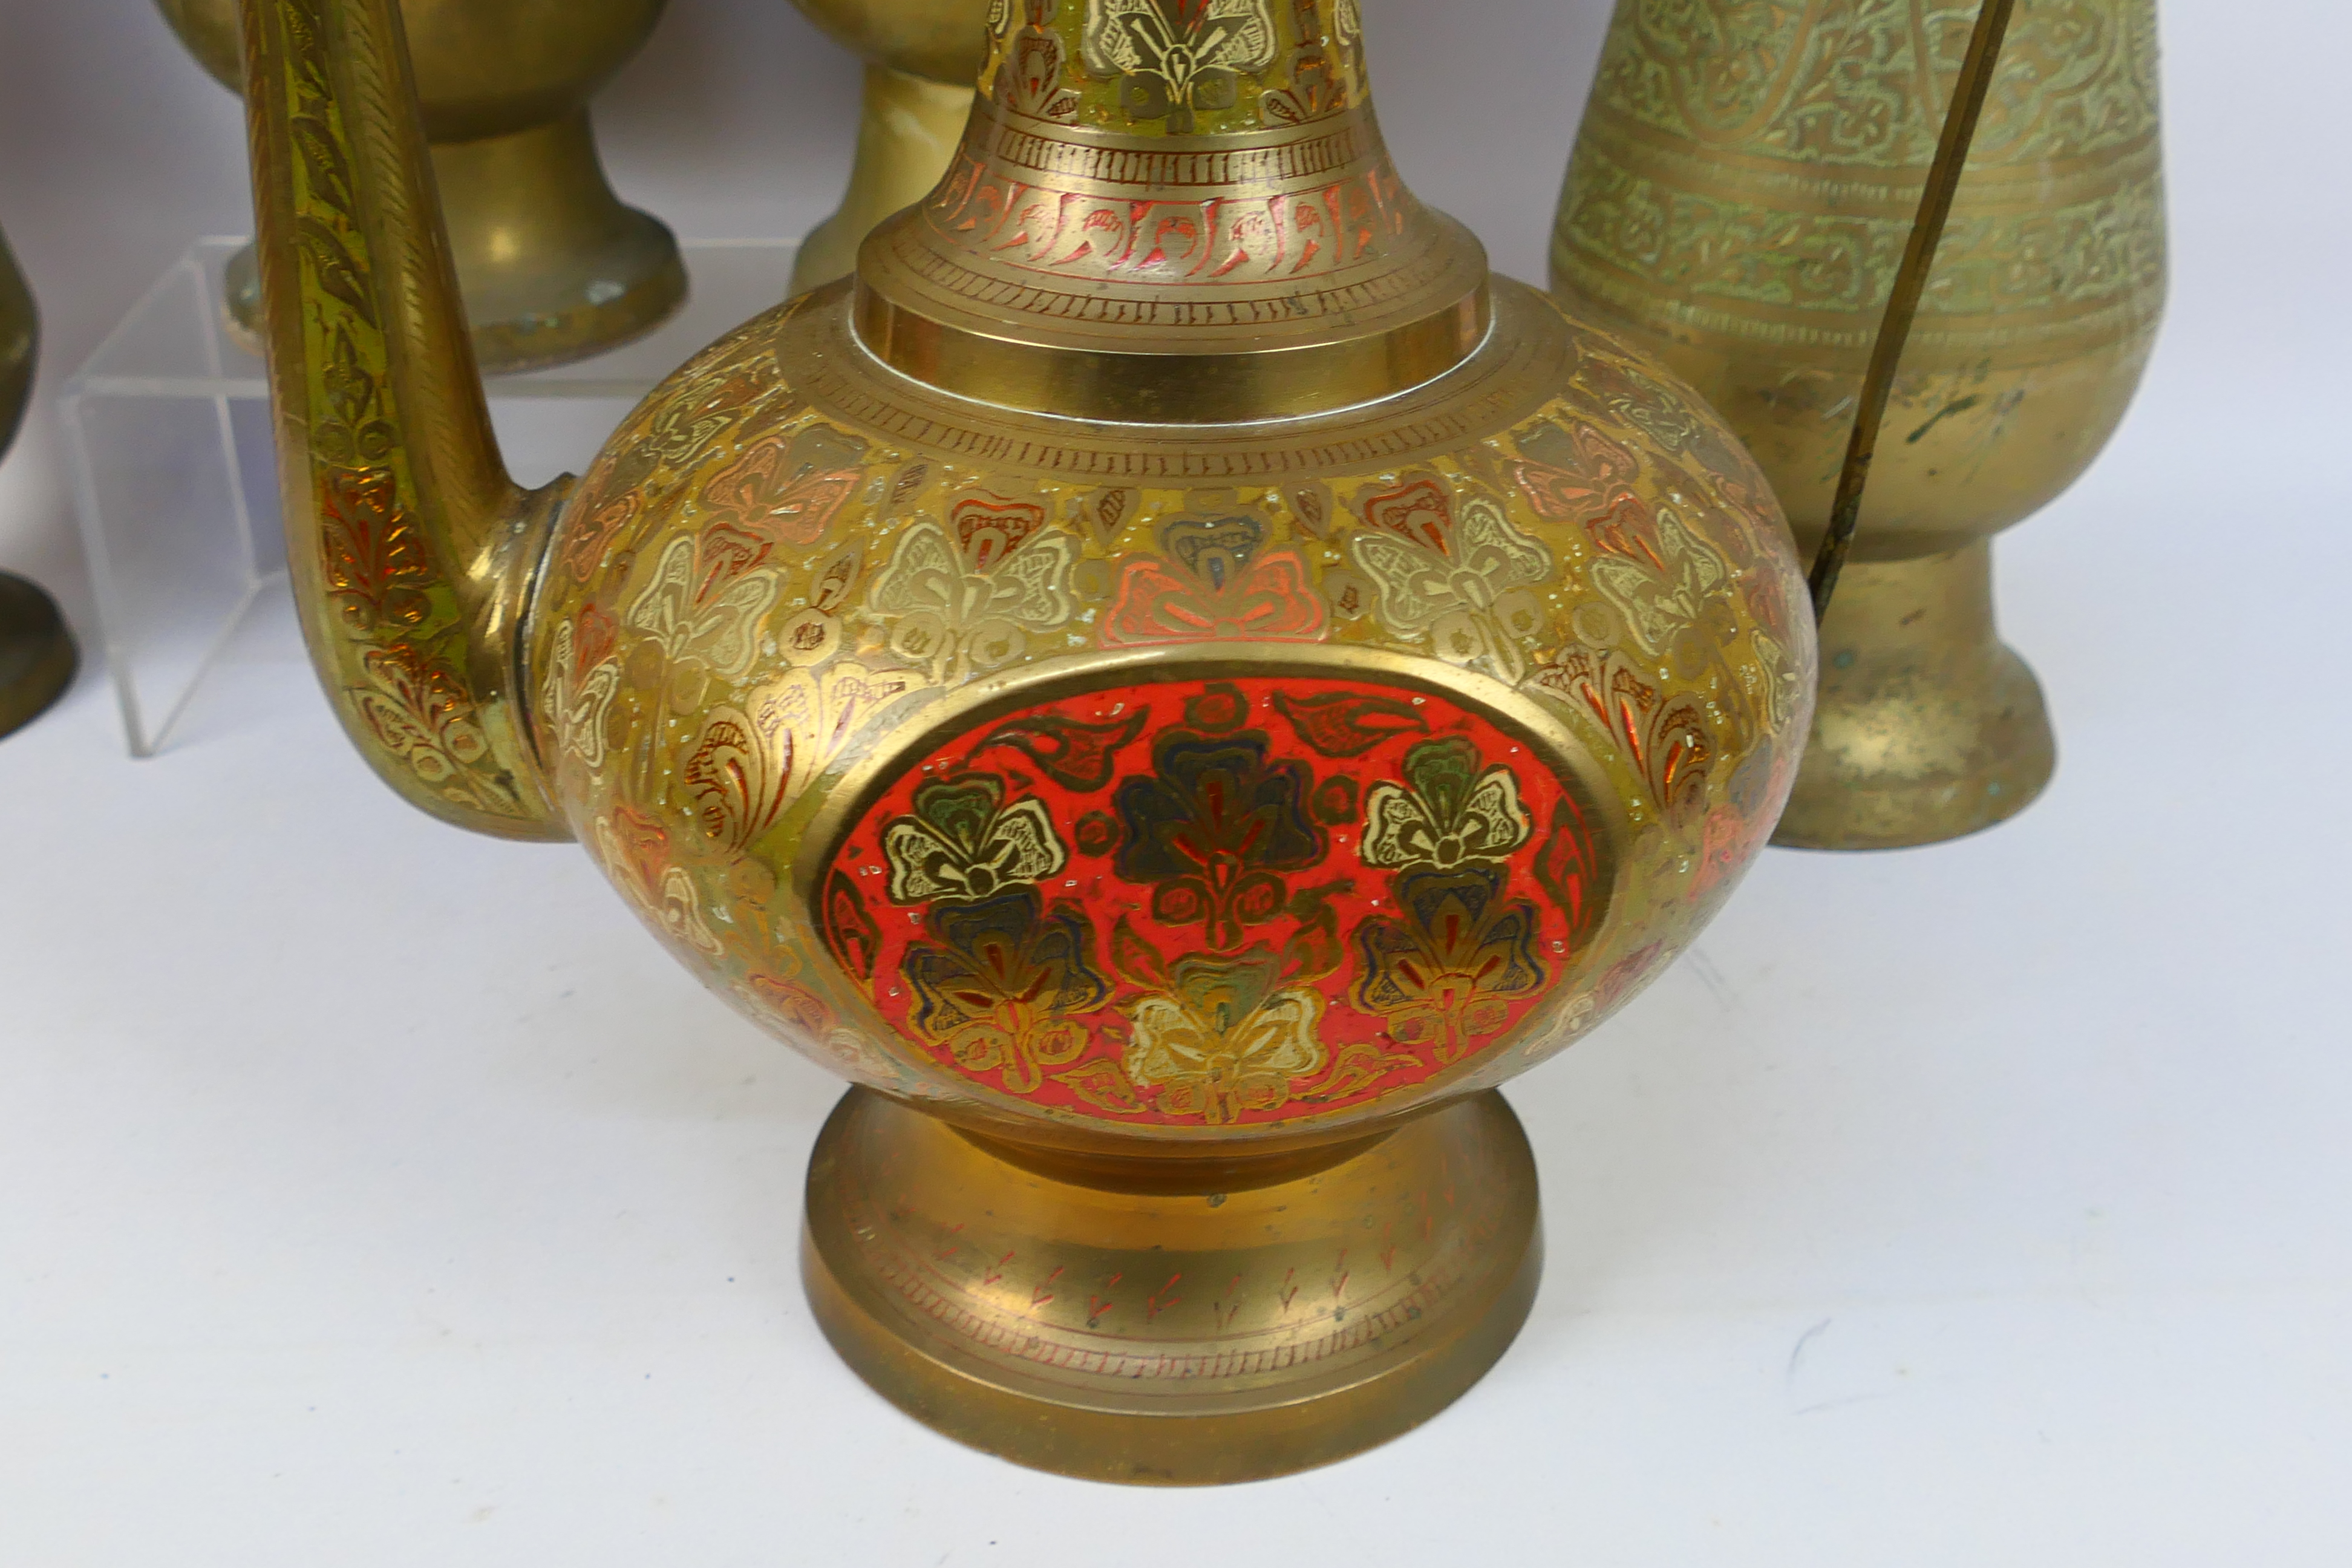 Lot to include four large brass vases with chased decoration, - Image 7 of 7